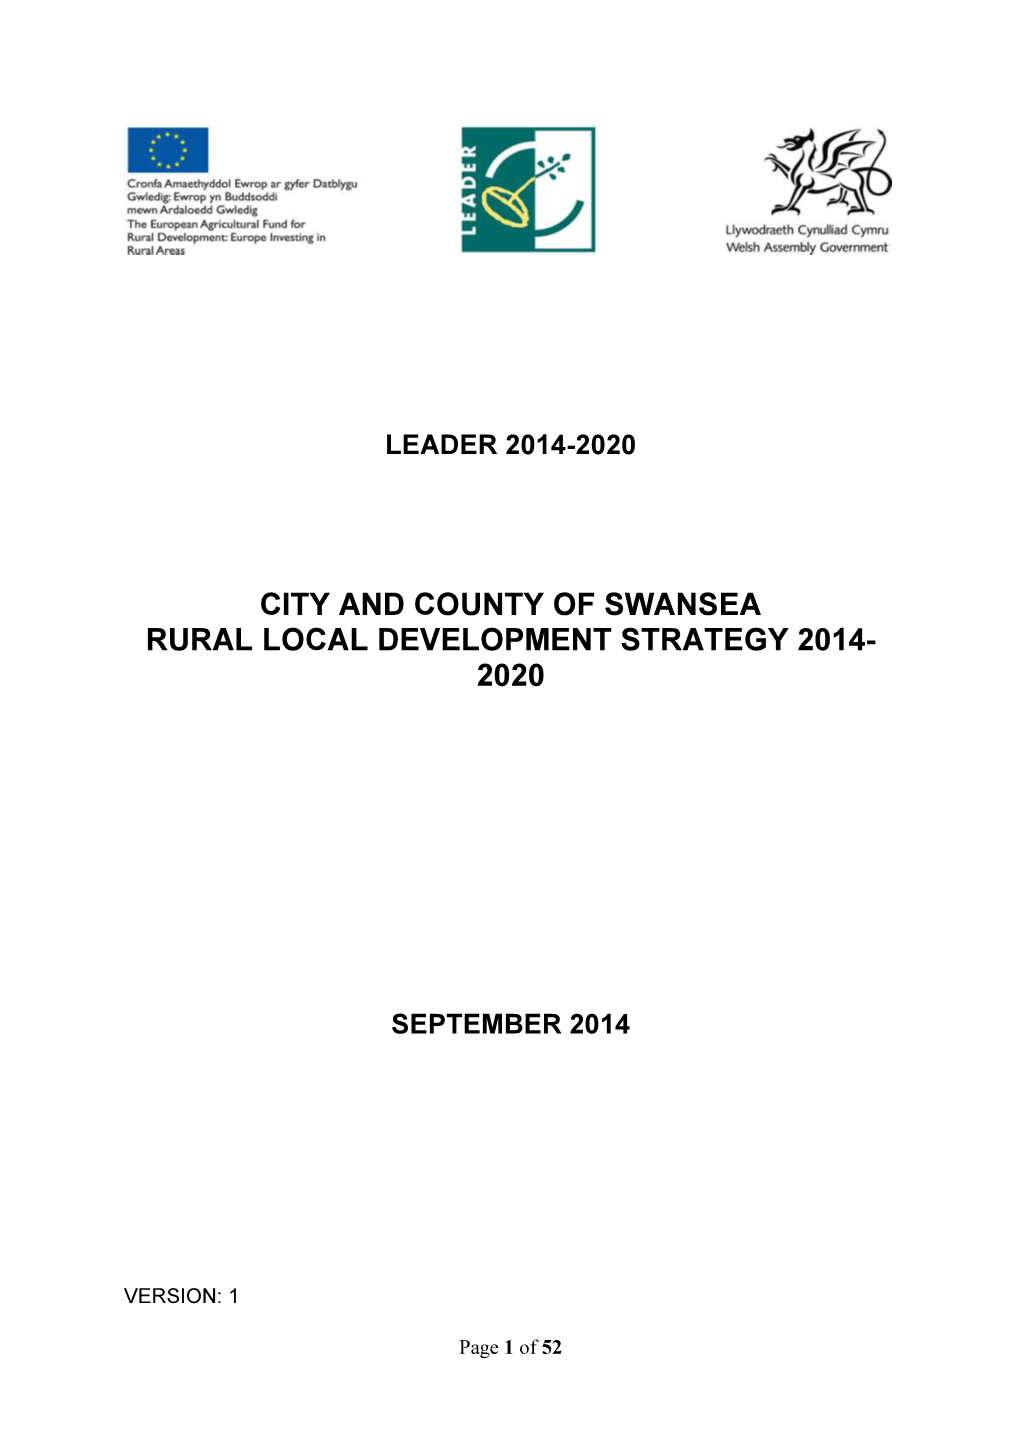 City and County of Swansea Rural Local Development Strategy 2014- 2020